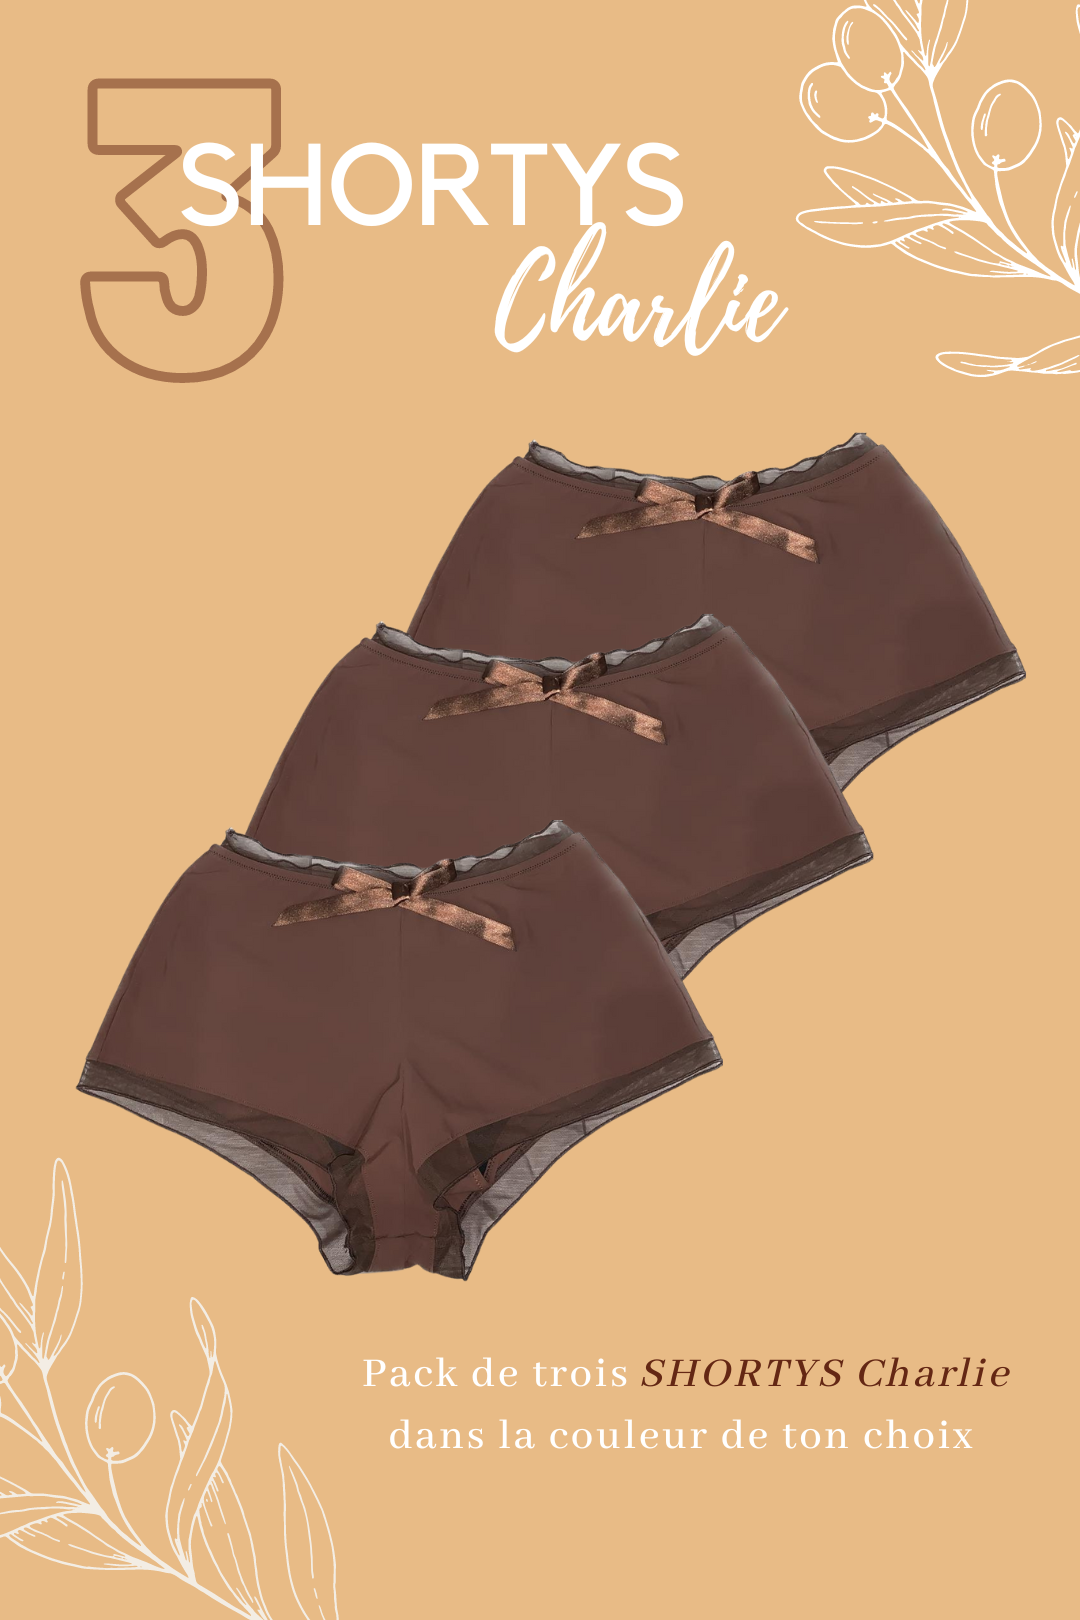 Trio-Pack - 3 Periodenshortys Charlie